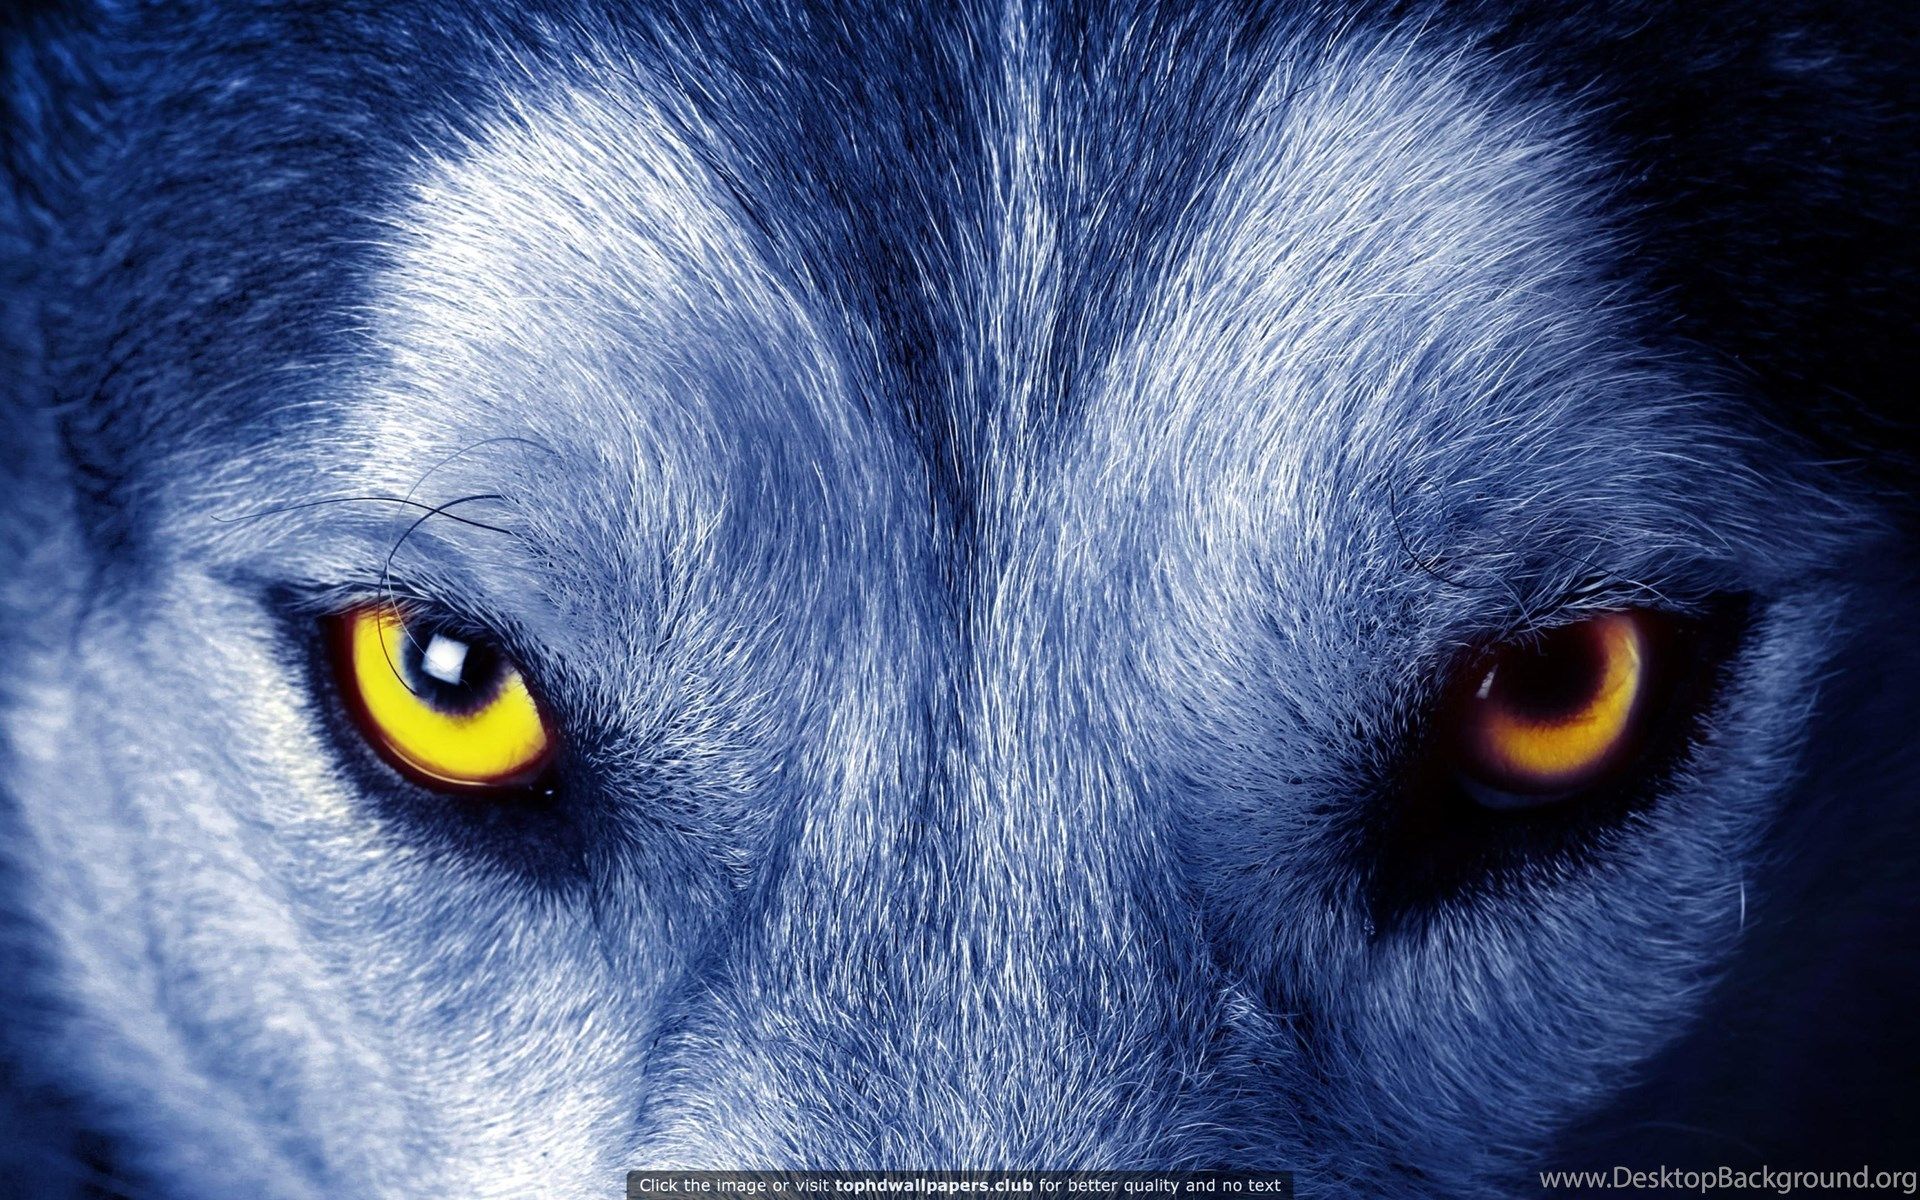 Best Wolf 4K Or HD Wallpaper For Your PC, Mac Or Mobile Device Desktop Background